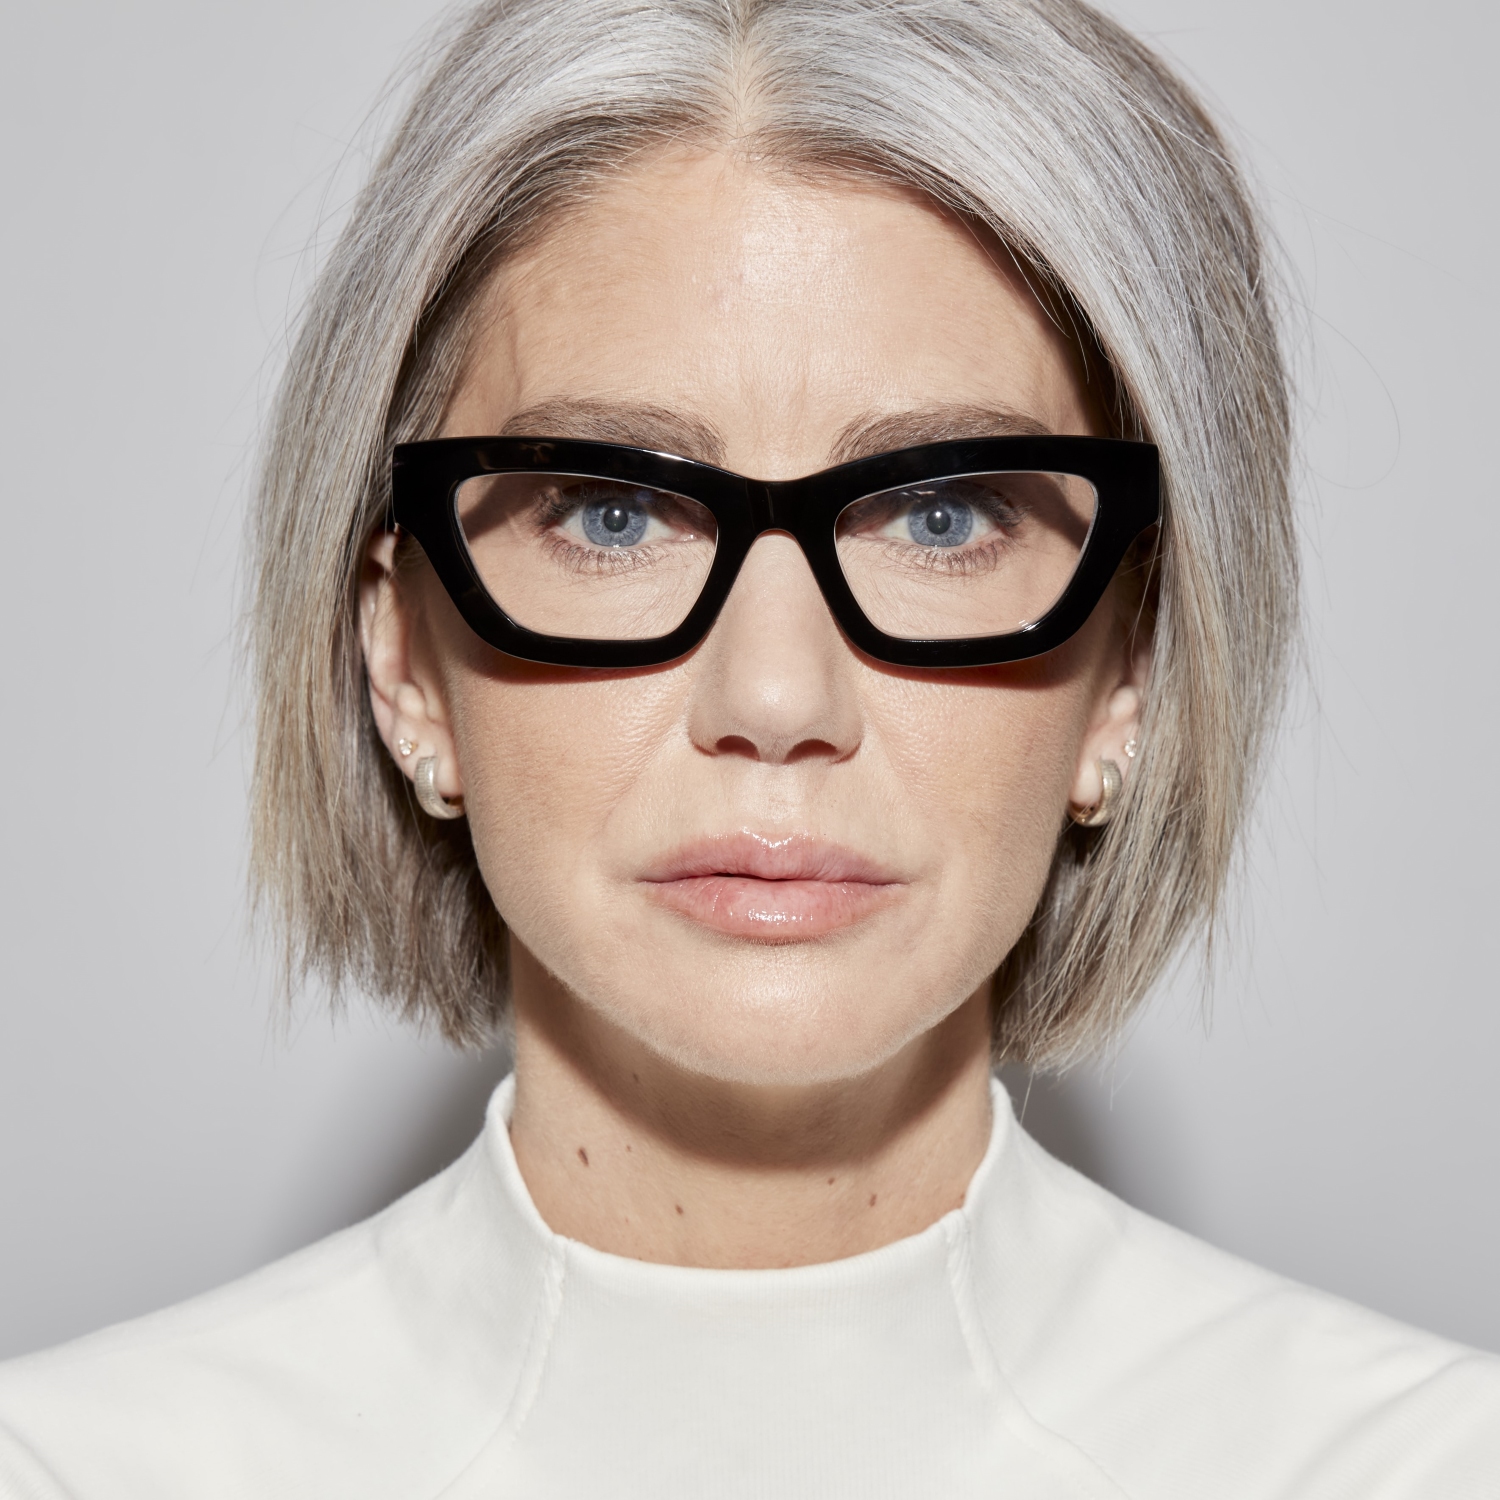 Photo of a man or woman wearing Jade Cream Reading Glasses by French Kiwis